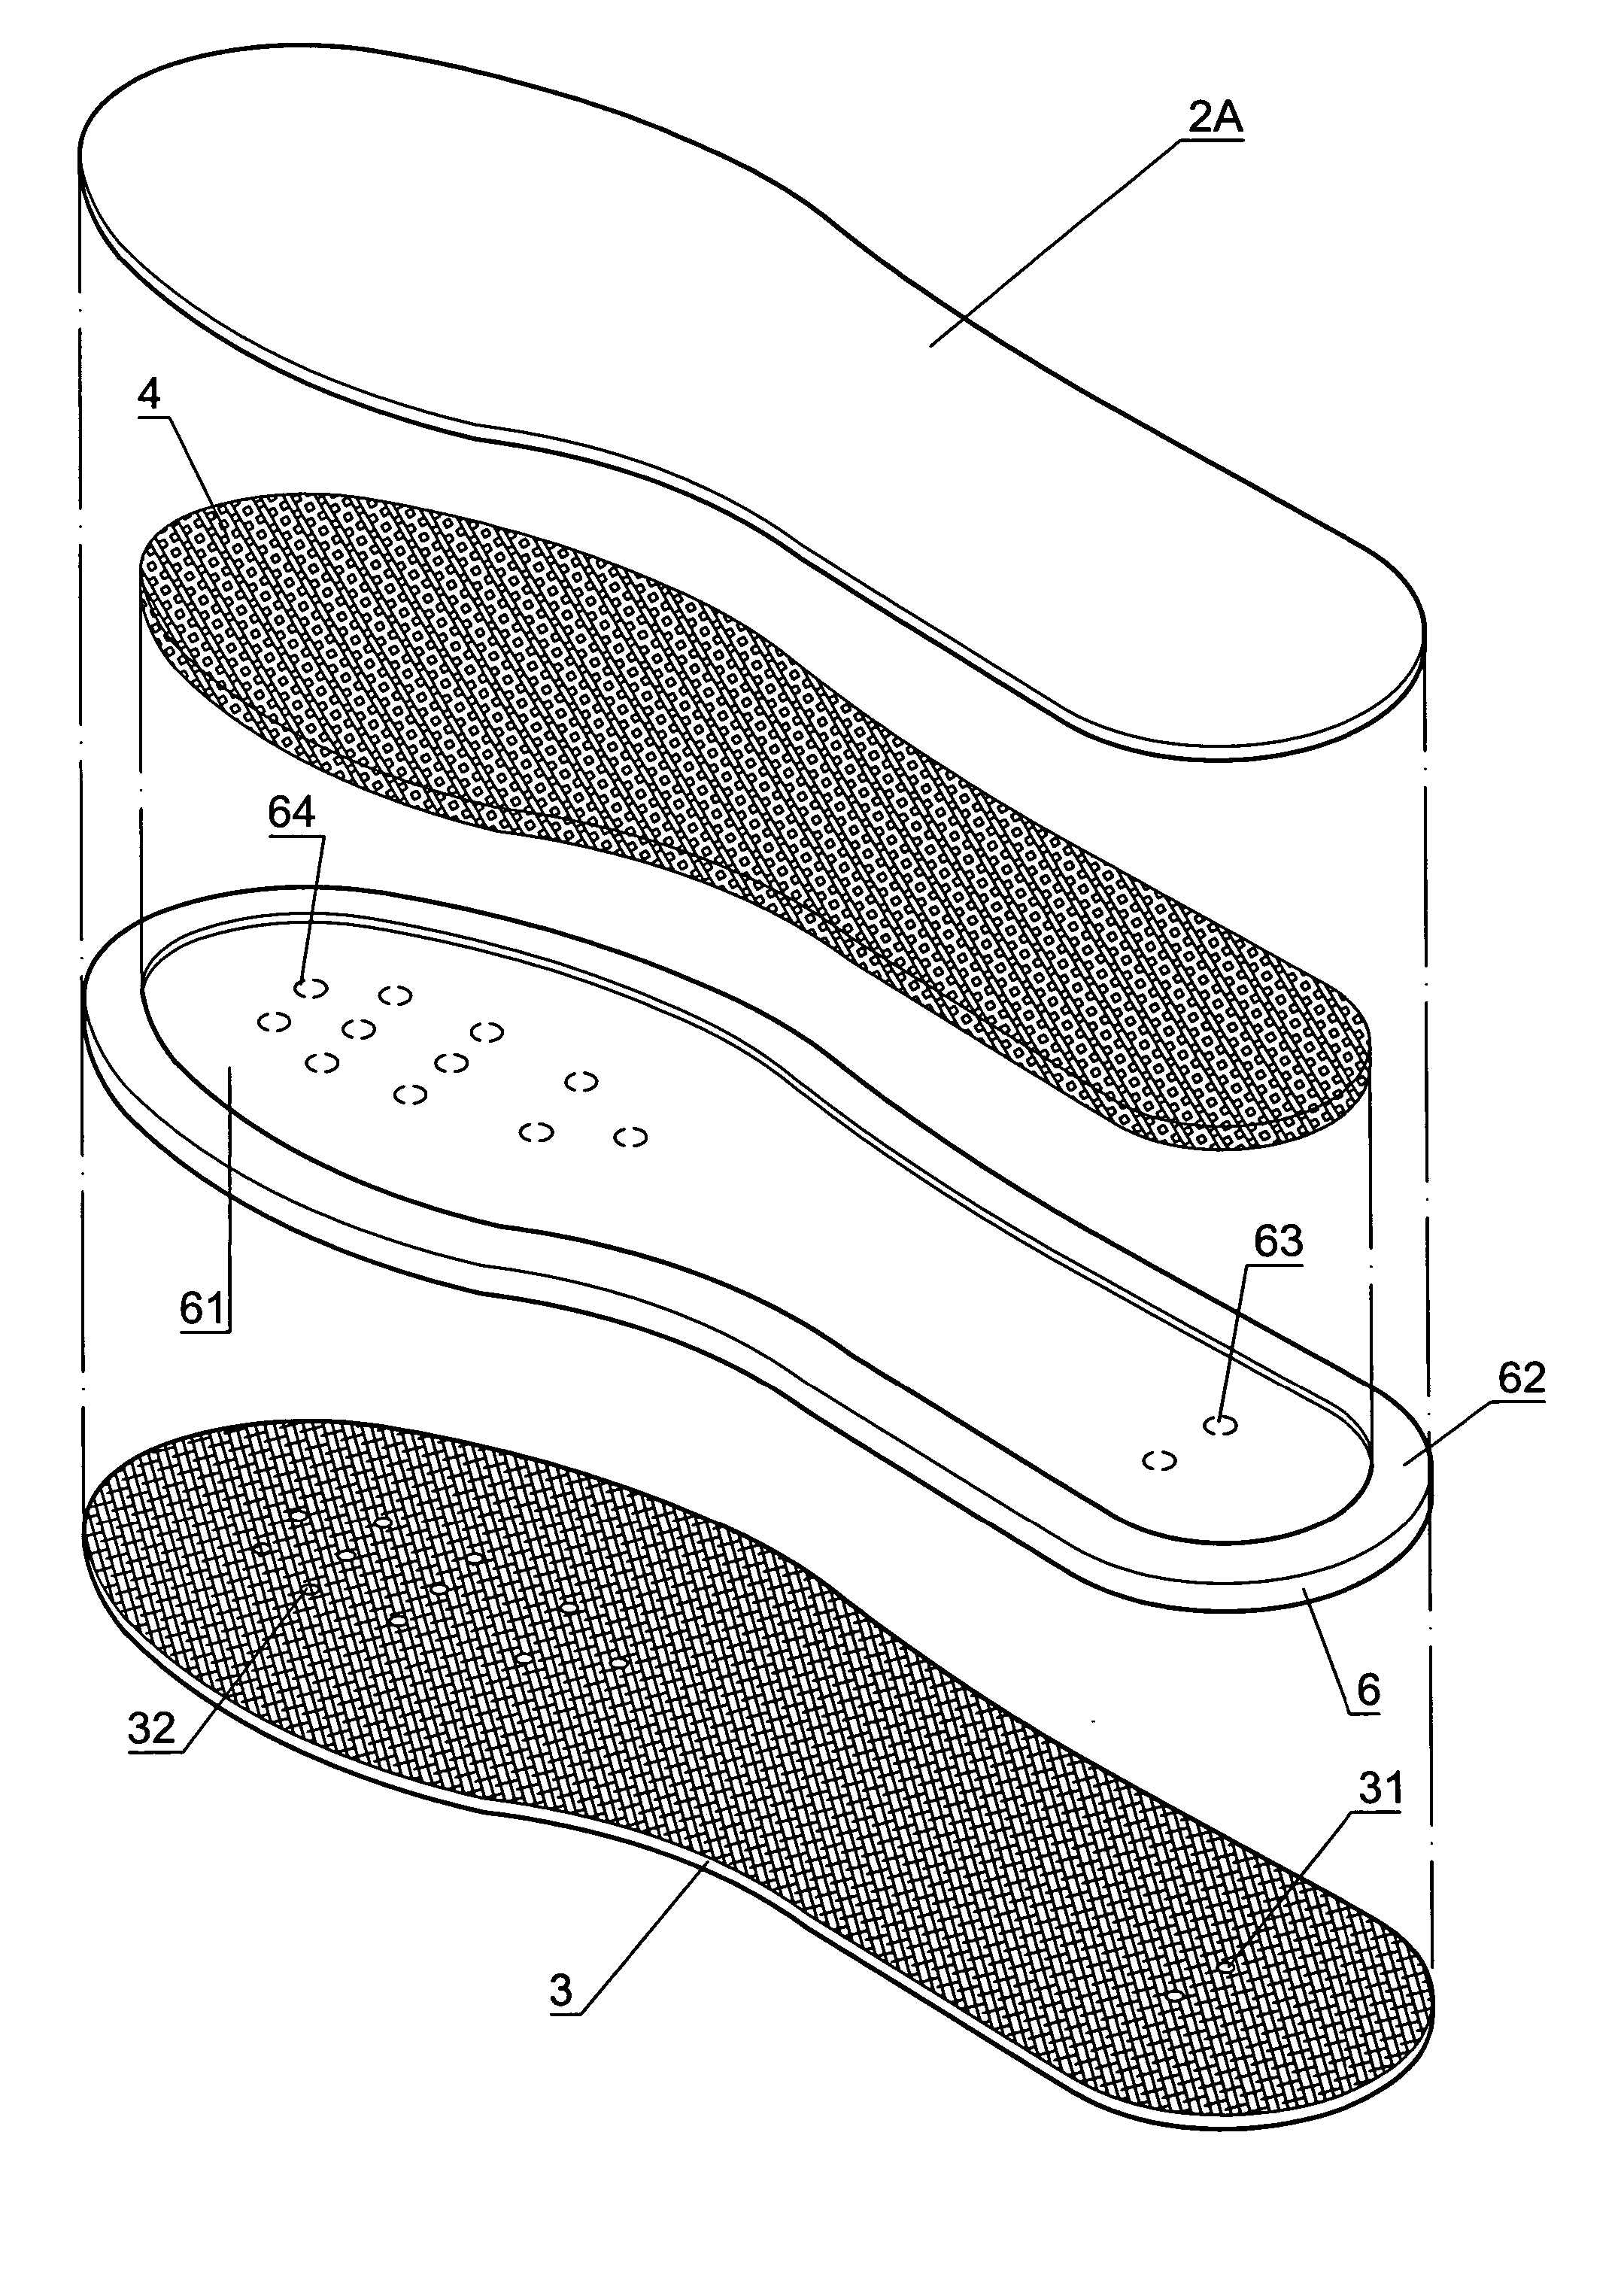 Structure of ventilating insole